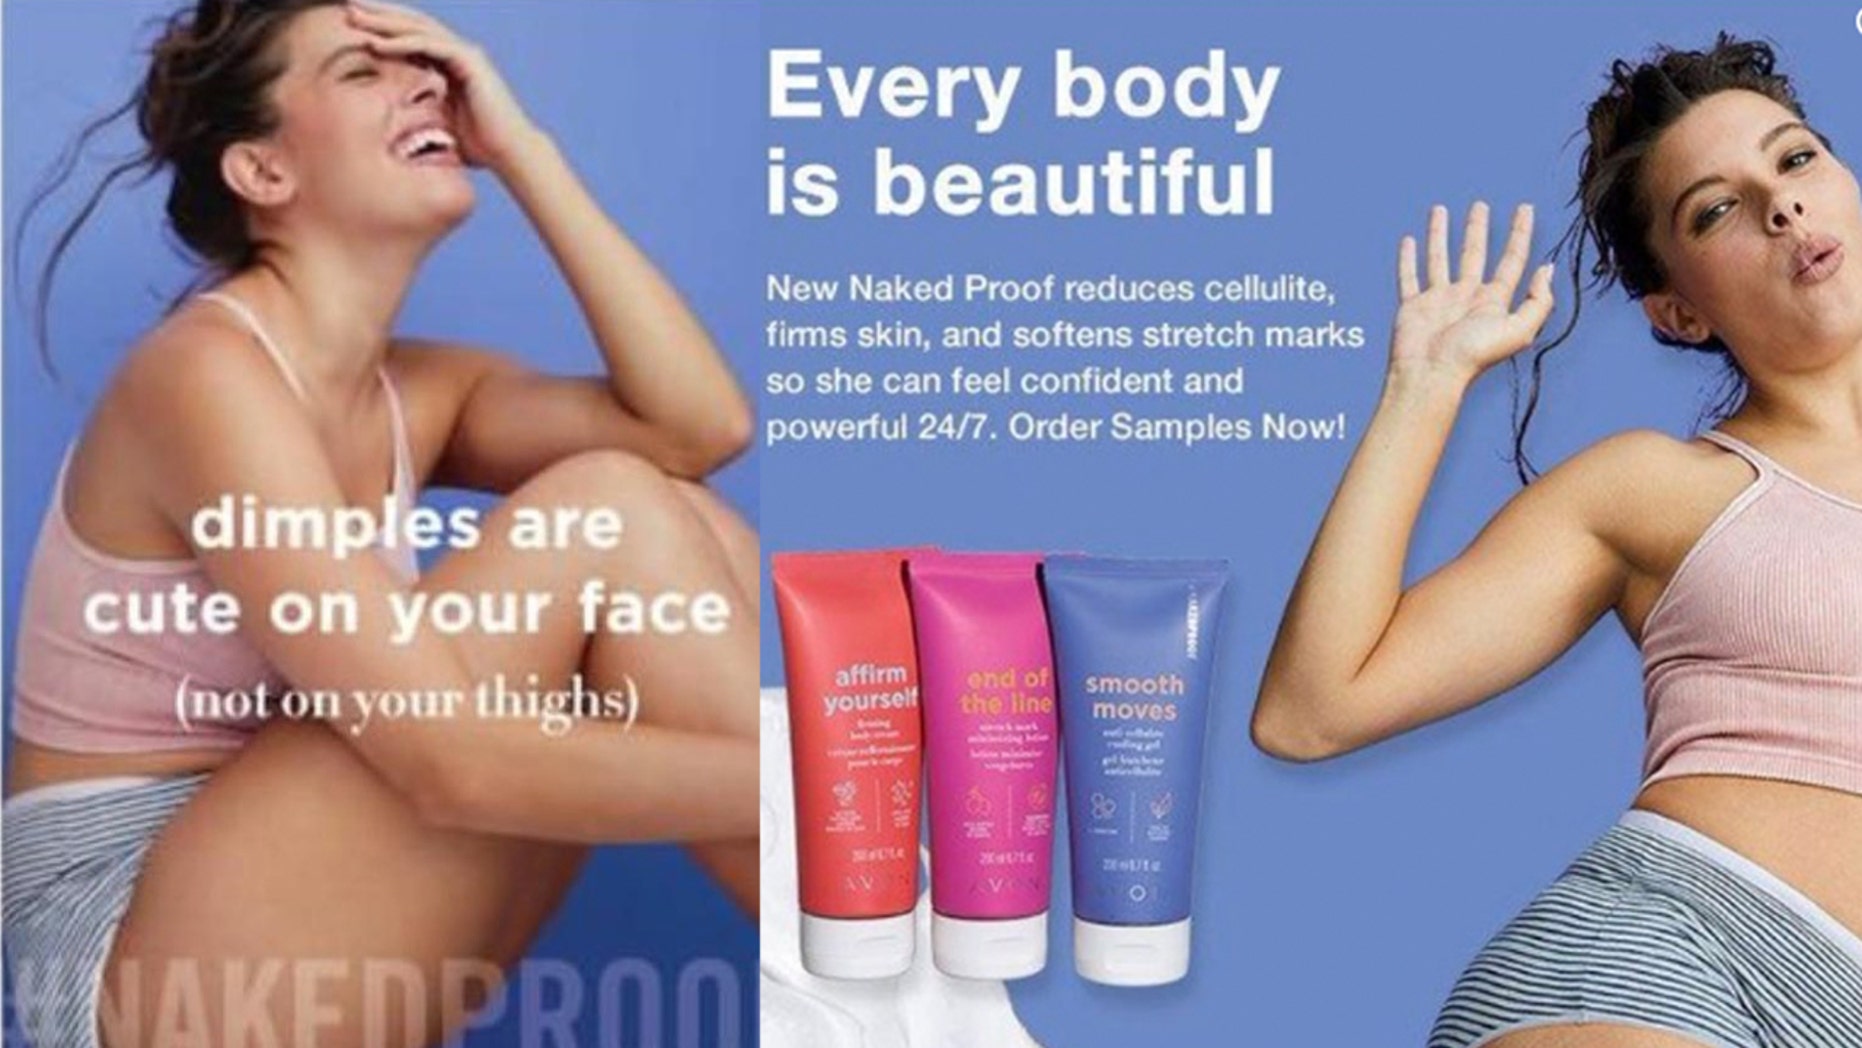 Avon apologizes for body shaming ‘dimples’ ad after social media backlash